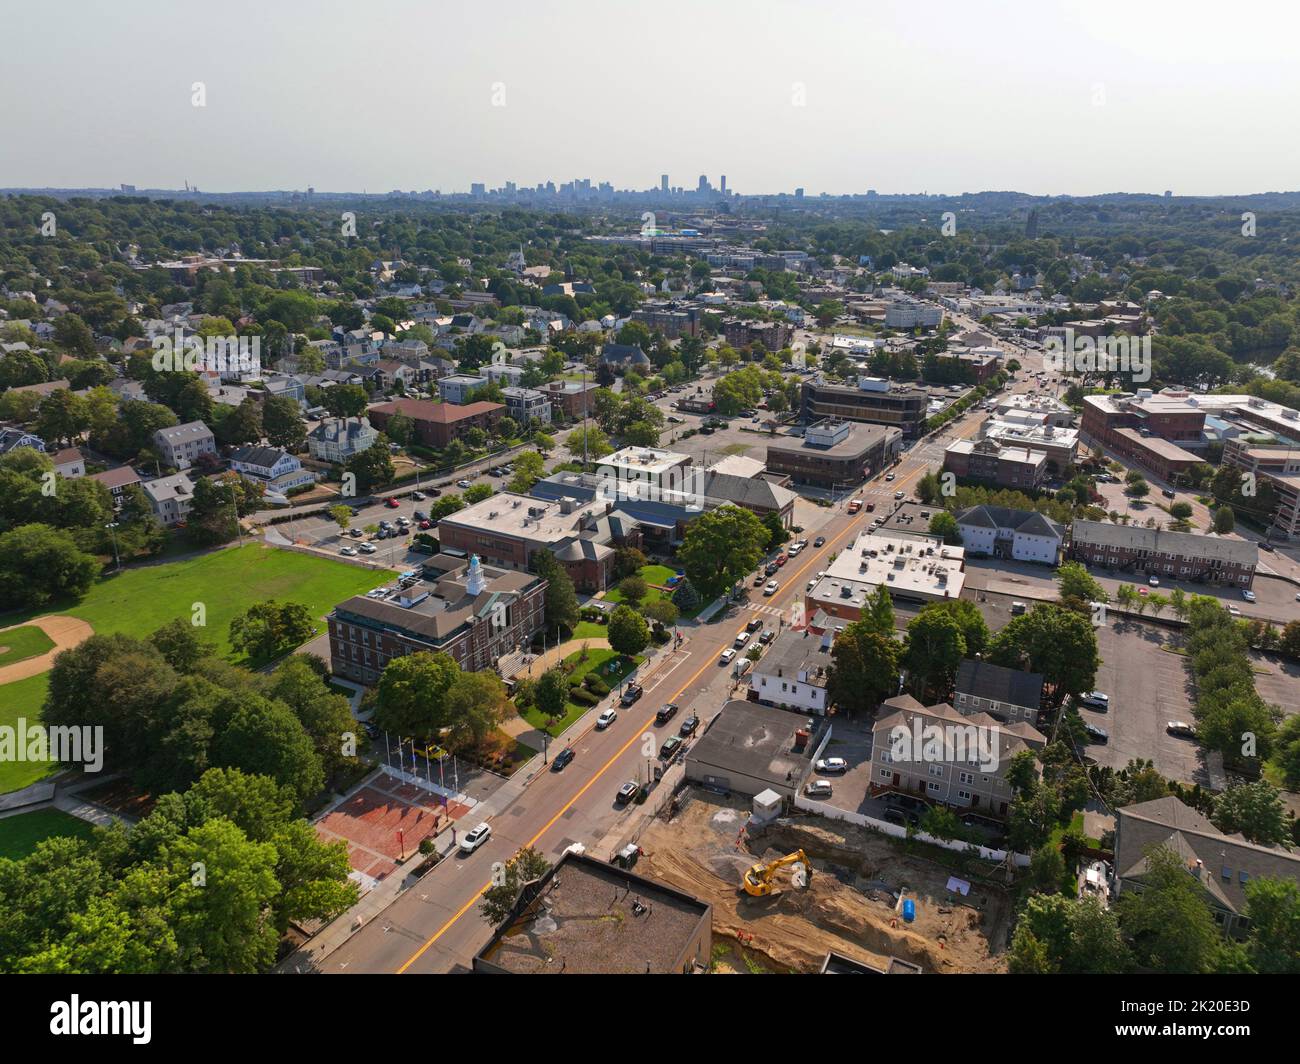 Watertown Town Hall aerial view at 149 Main Street in historic city center of Watertown, Massachusetts MA, USA. Stock Photo